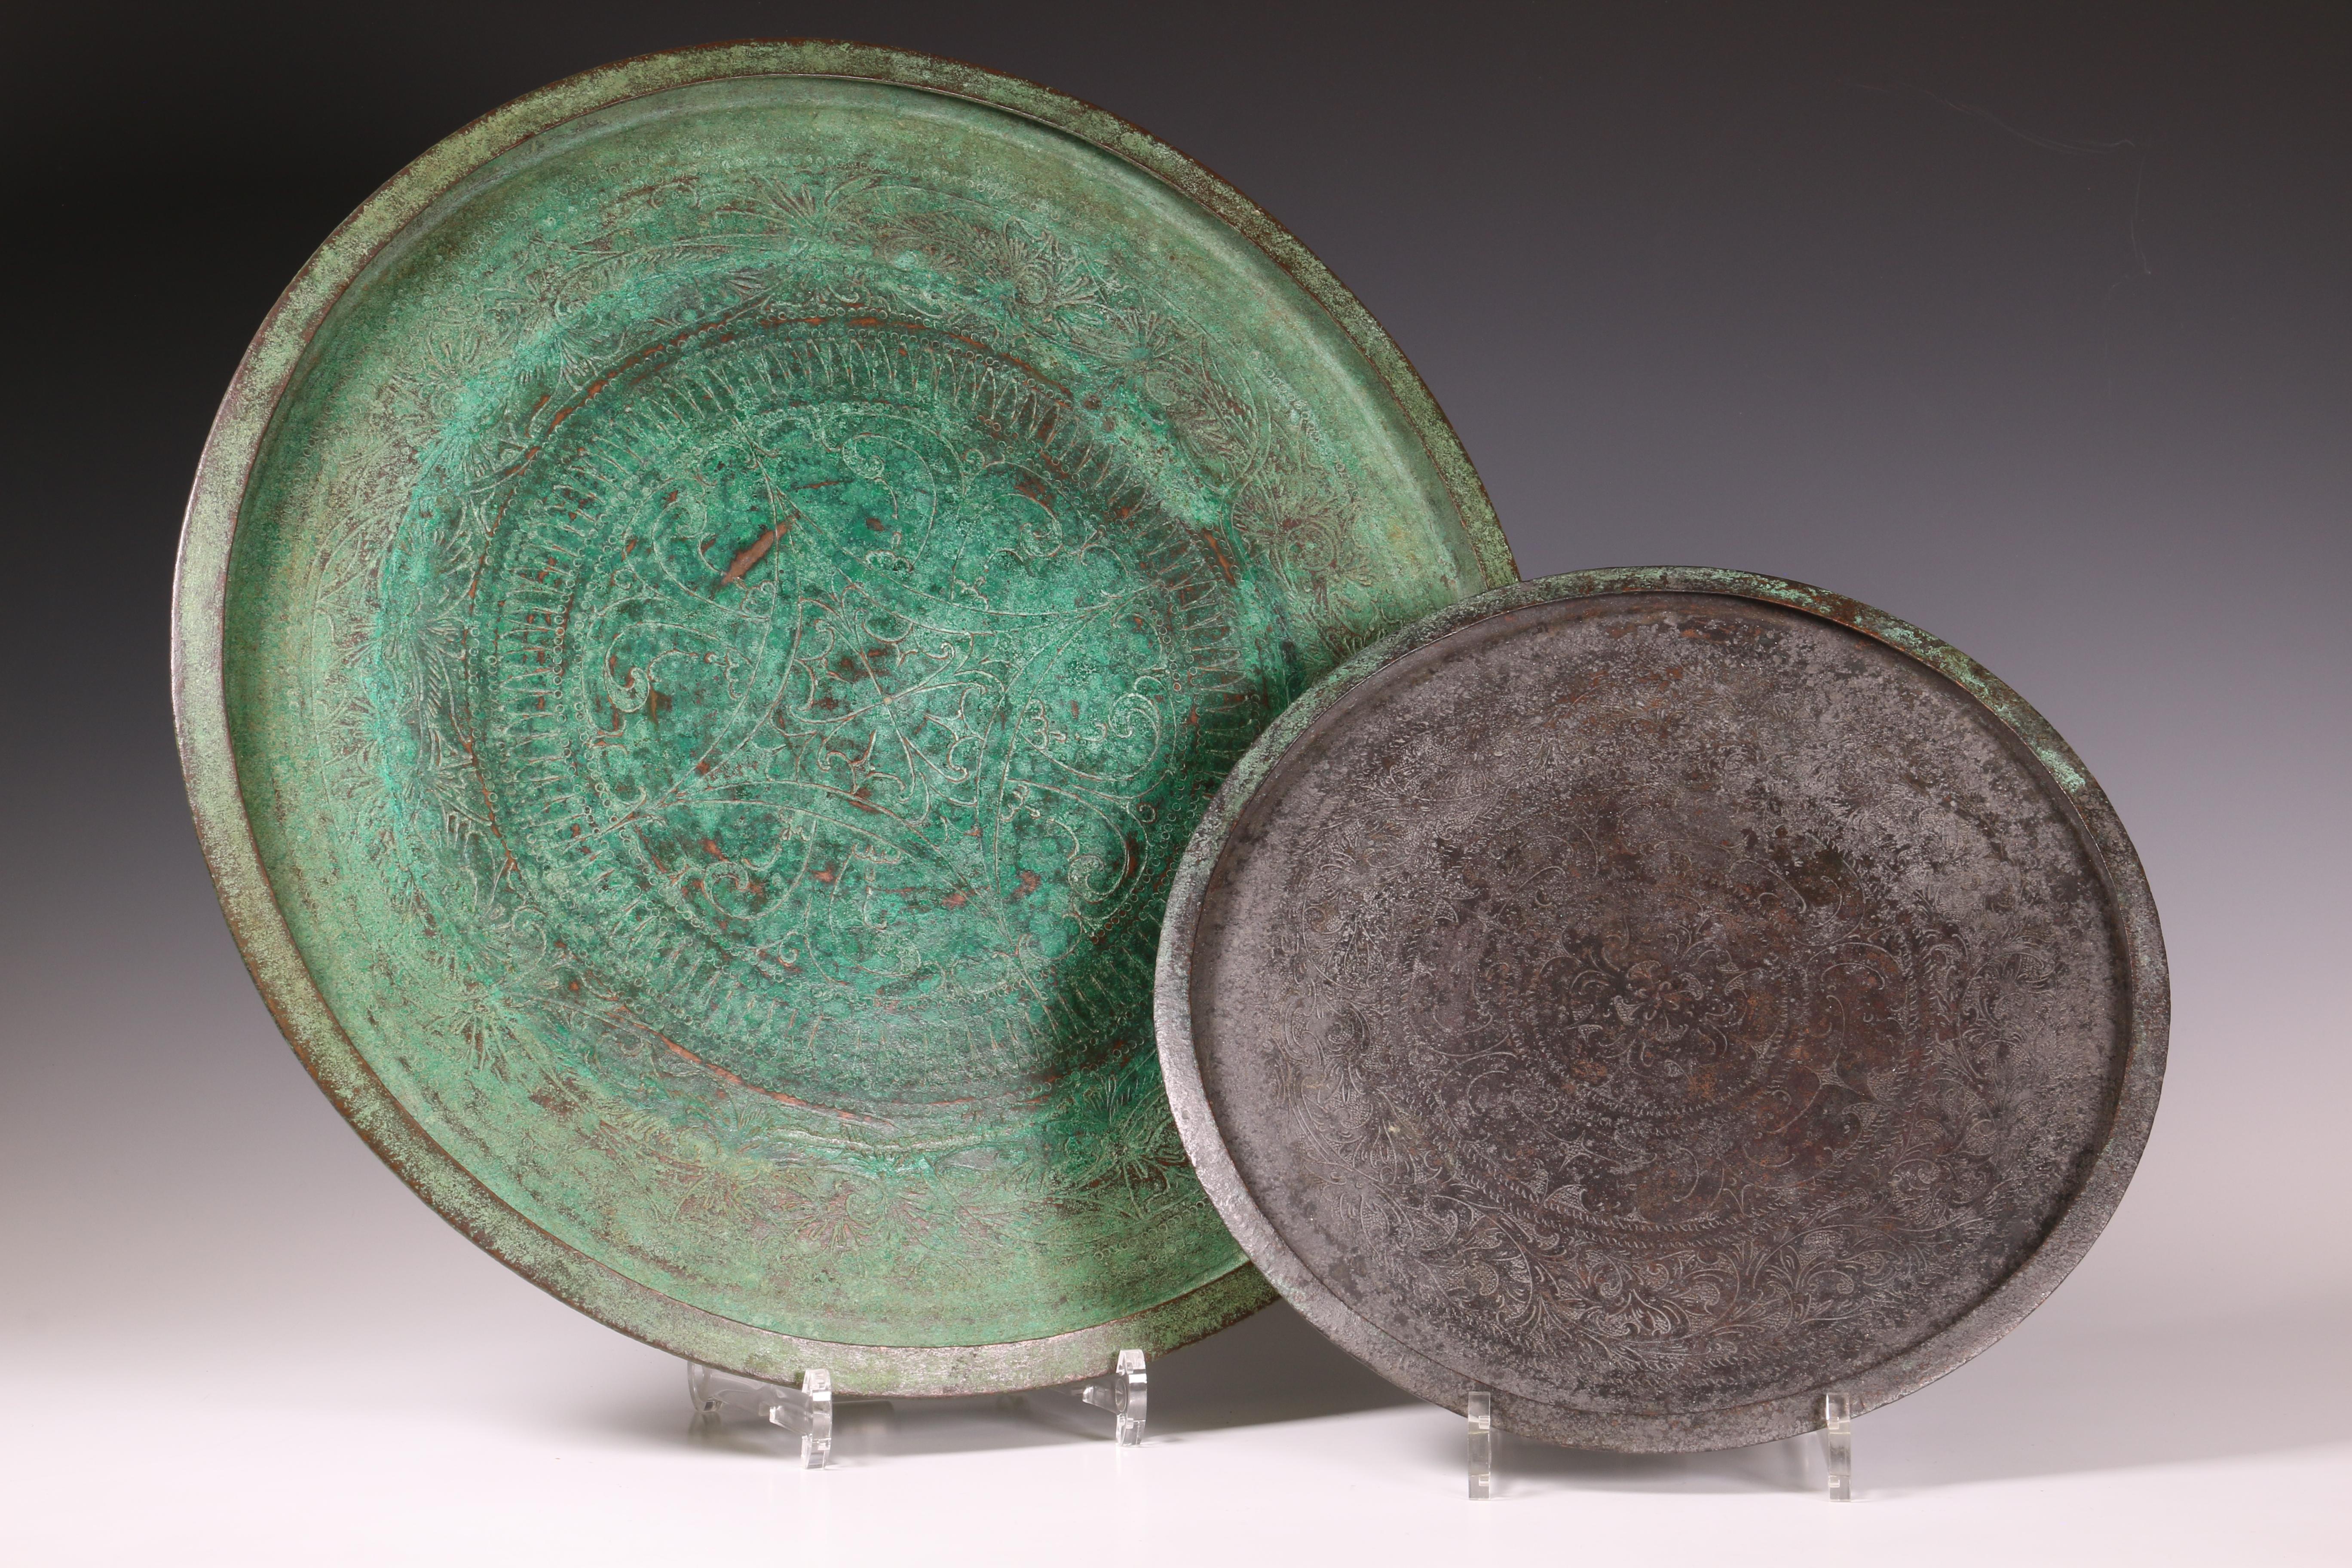 Java, two copper ceremonial dishes, talam, Late Javanese period - Image 2 of 5